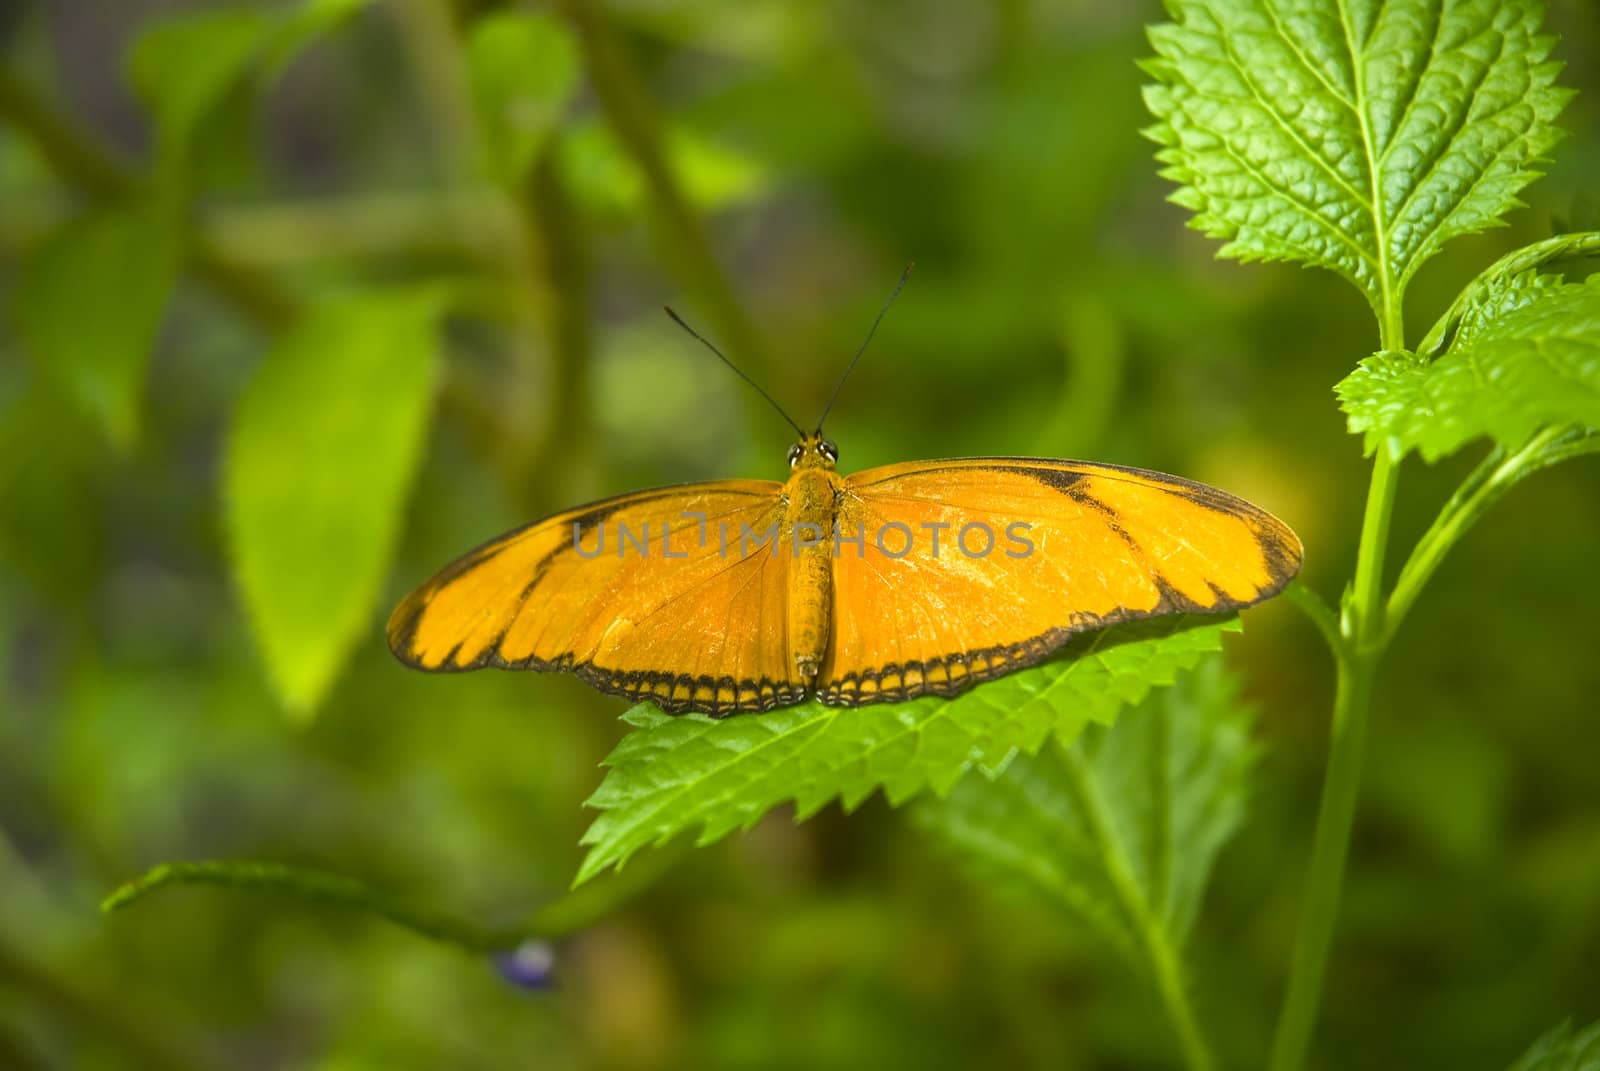 Orange butterfly on a leaf with a green background